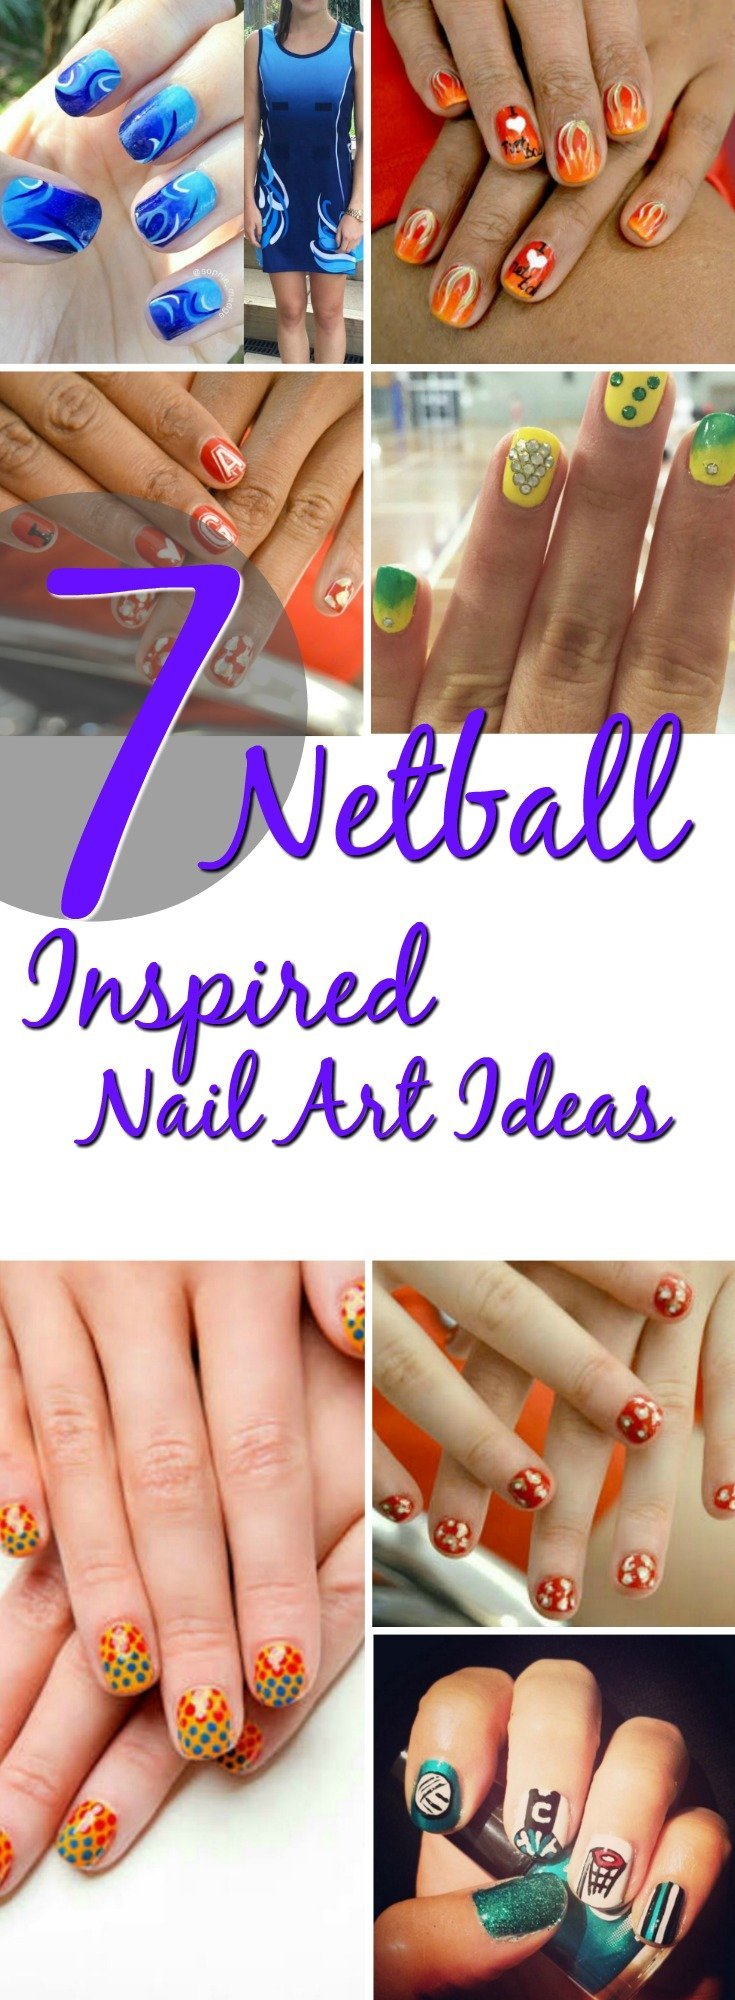 7 netball inspired nail art ideas If you are looking to get your netball fix in other ways here are some awesome netball nail art ideas inspired by the sport and perfect for short nails.